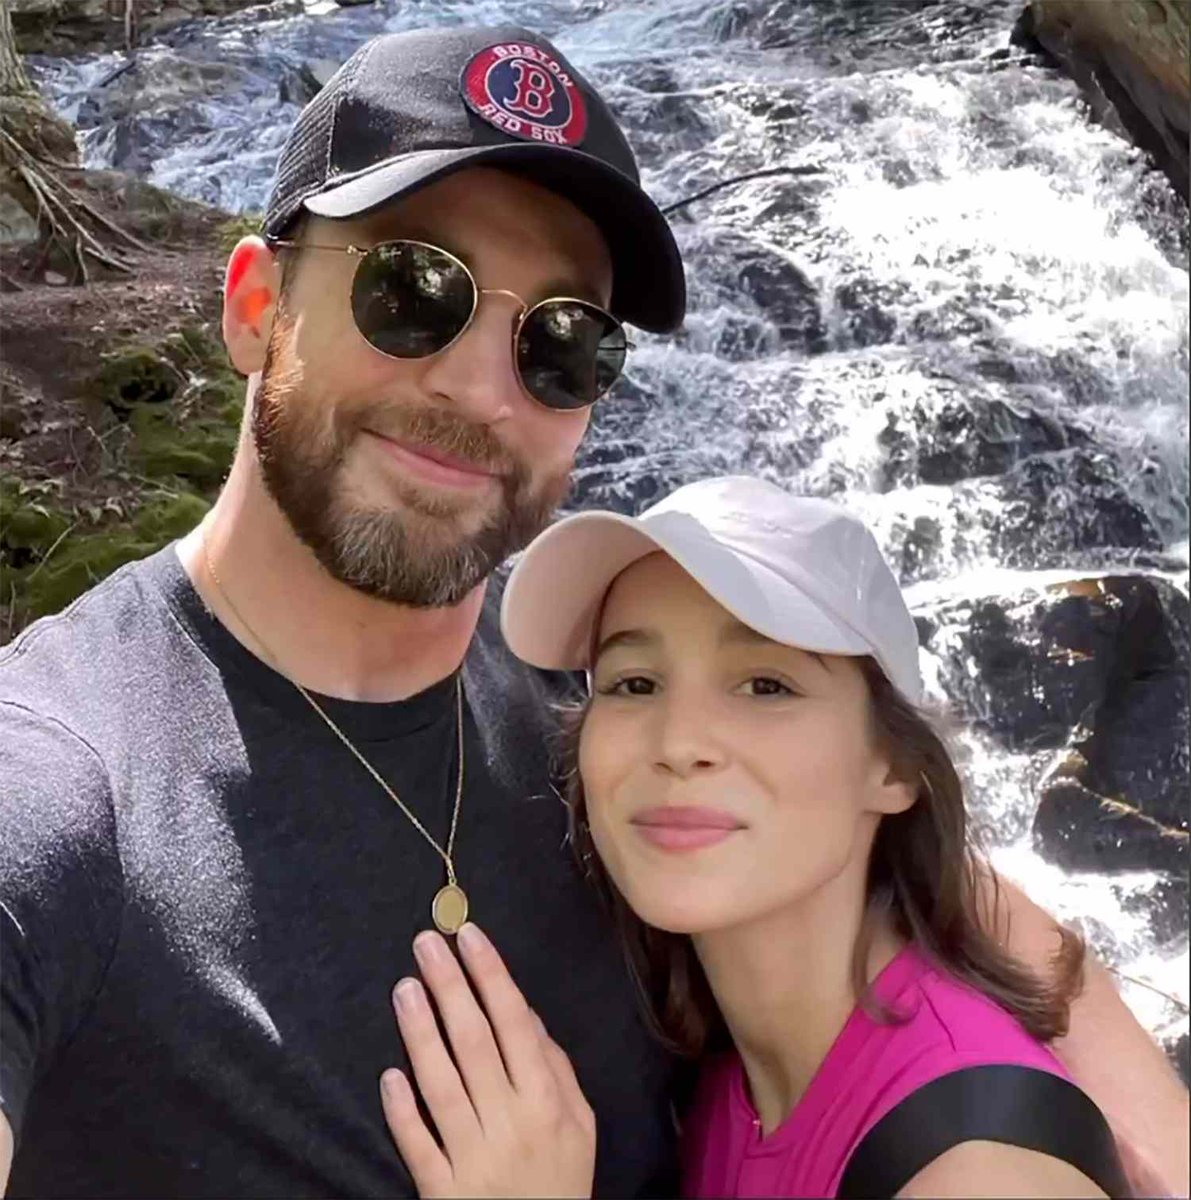 So #ChrisEvans (42y/o) just got married to #AlbaBaptista (26y/o) and some idiots here on X think that he's groomed her. 😑At what age can we call a woman 'a woman'? At what age can a woman make her own decisions? Why do #fakefeminists keep on infantilizing women? To control us?